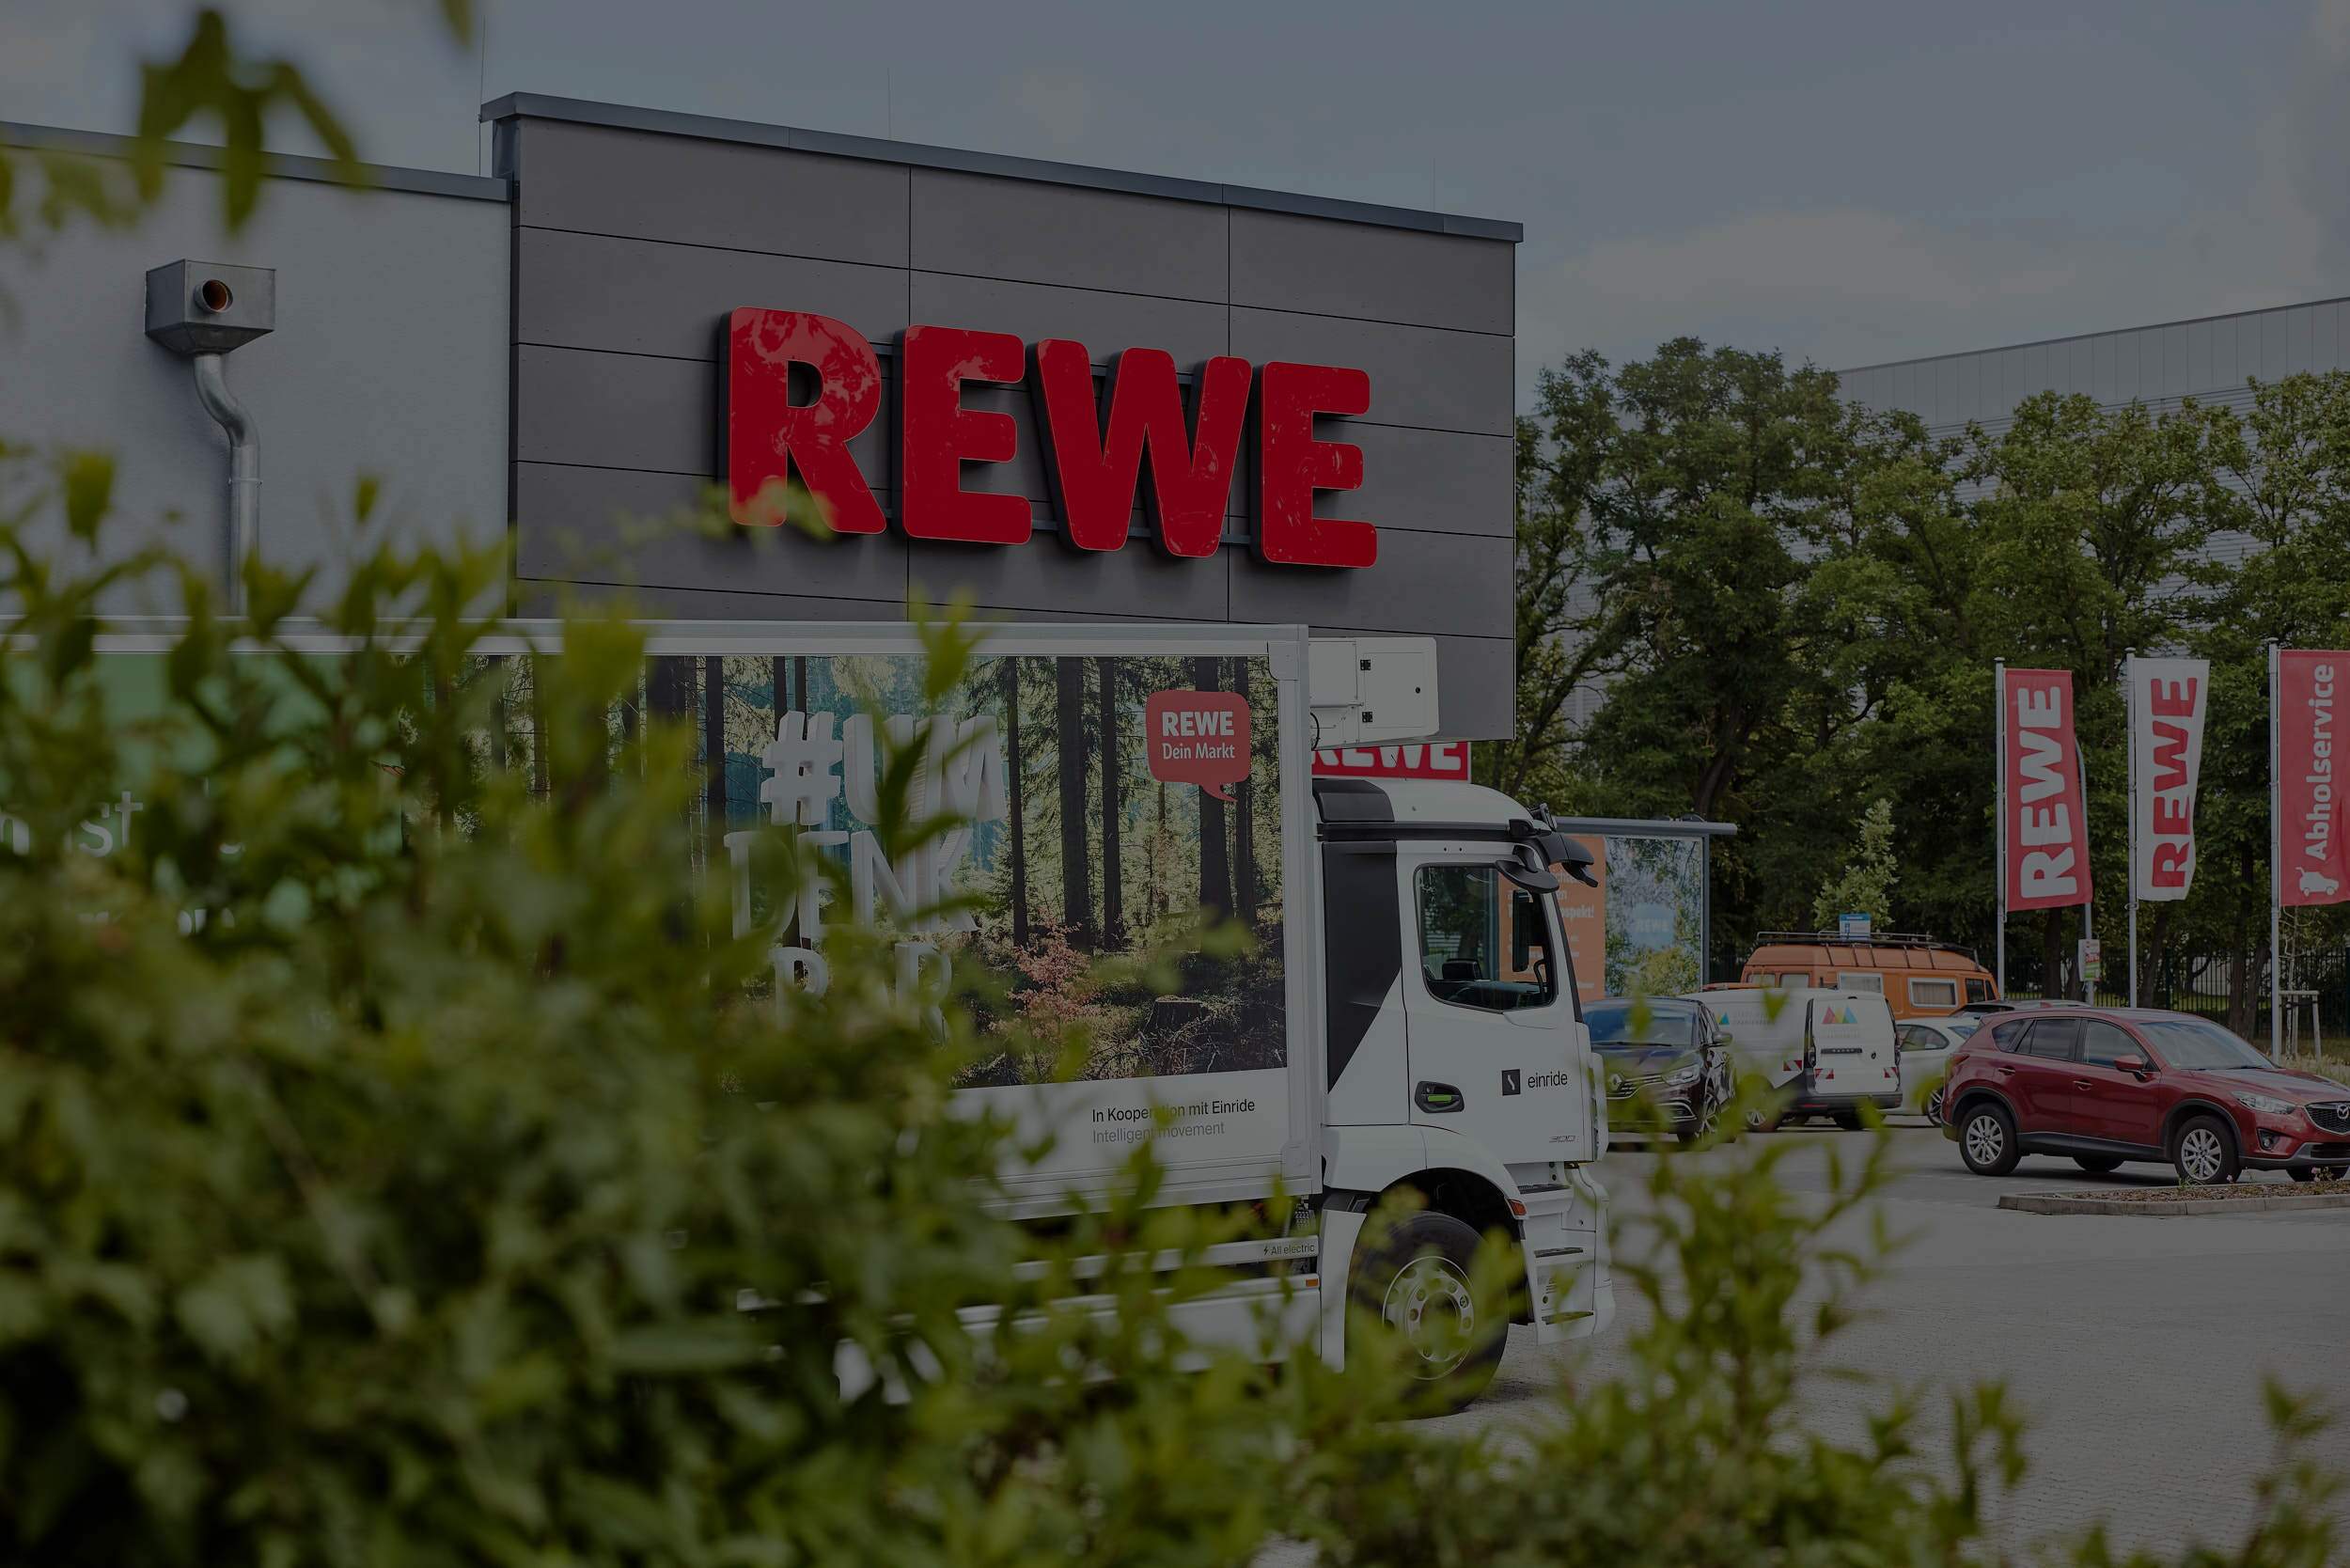 A truck sitting in front of REWE grocery store.